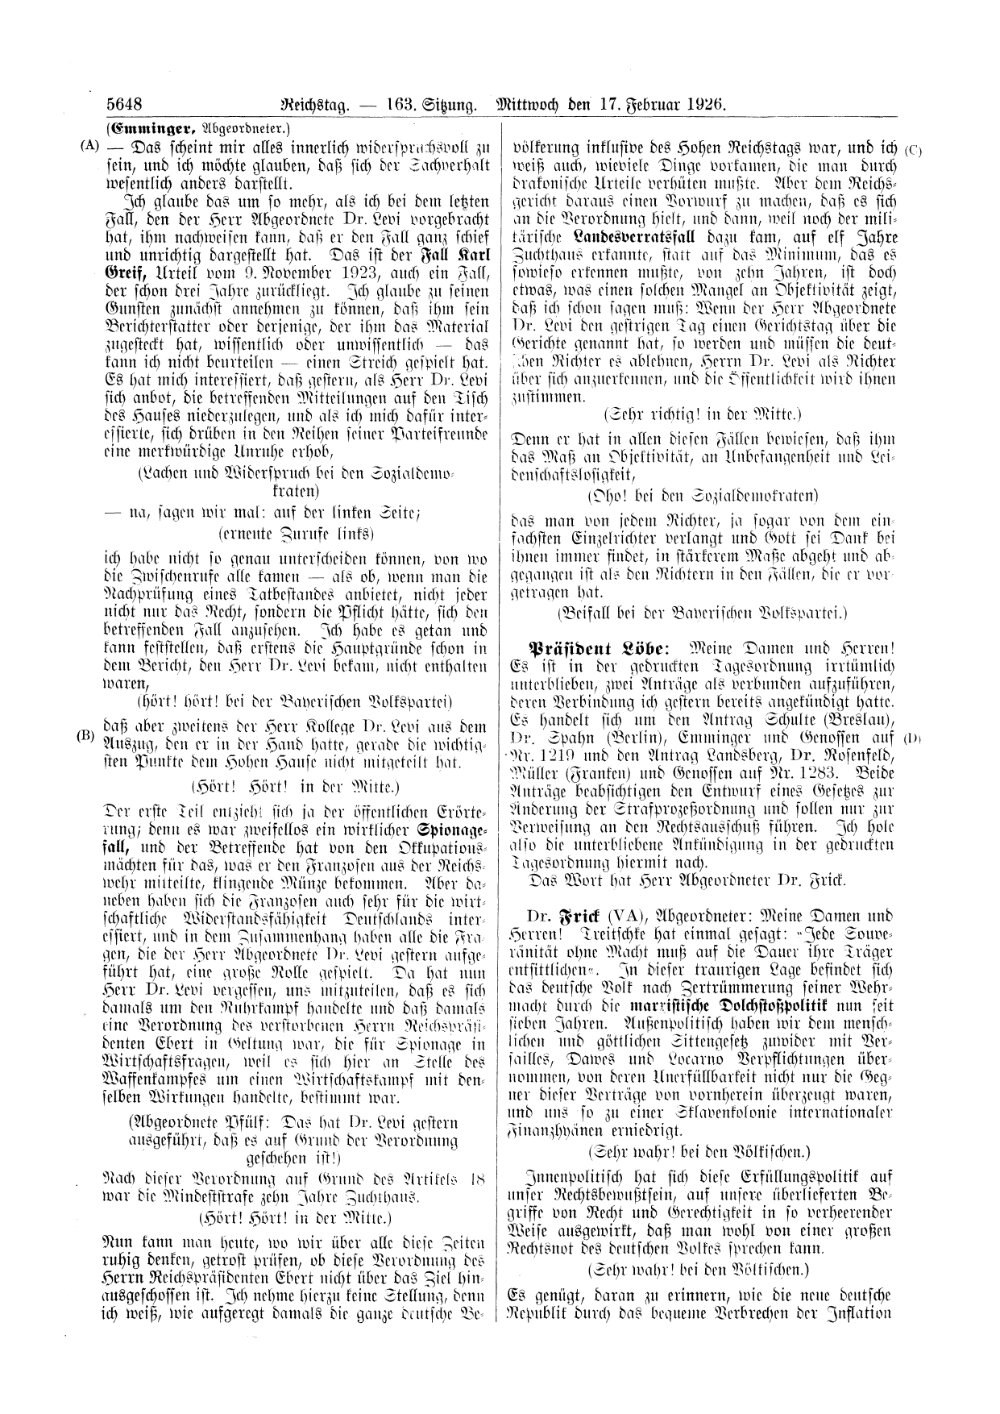 Scan of page 5648